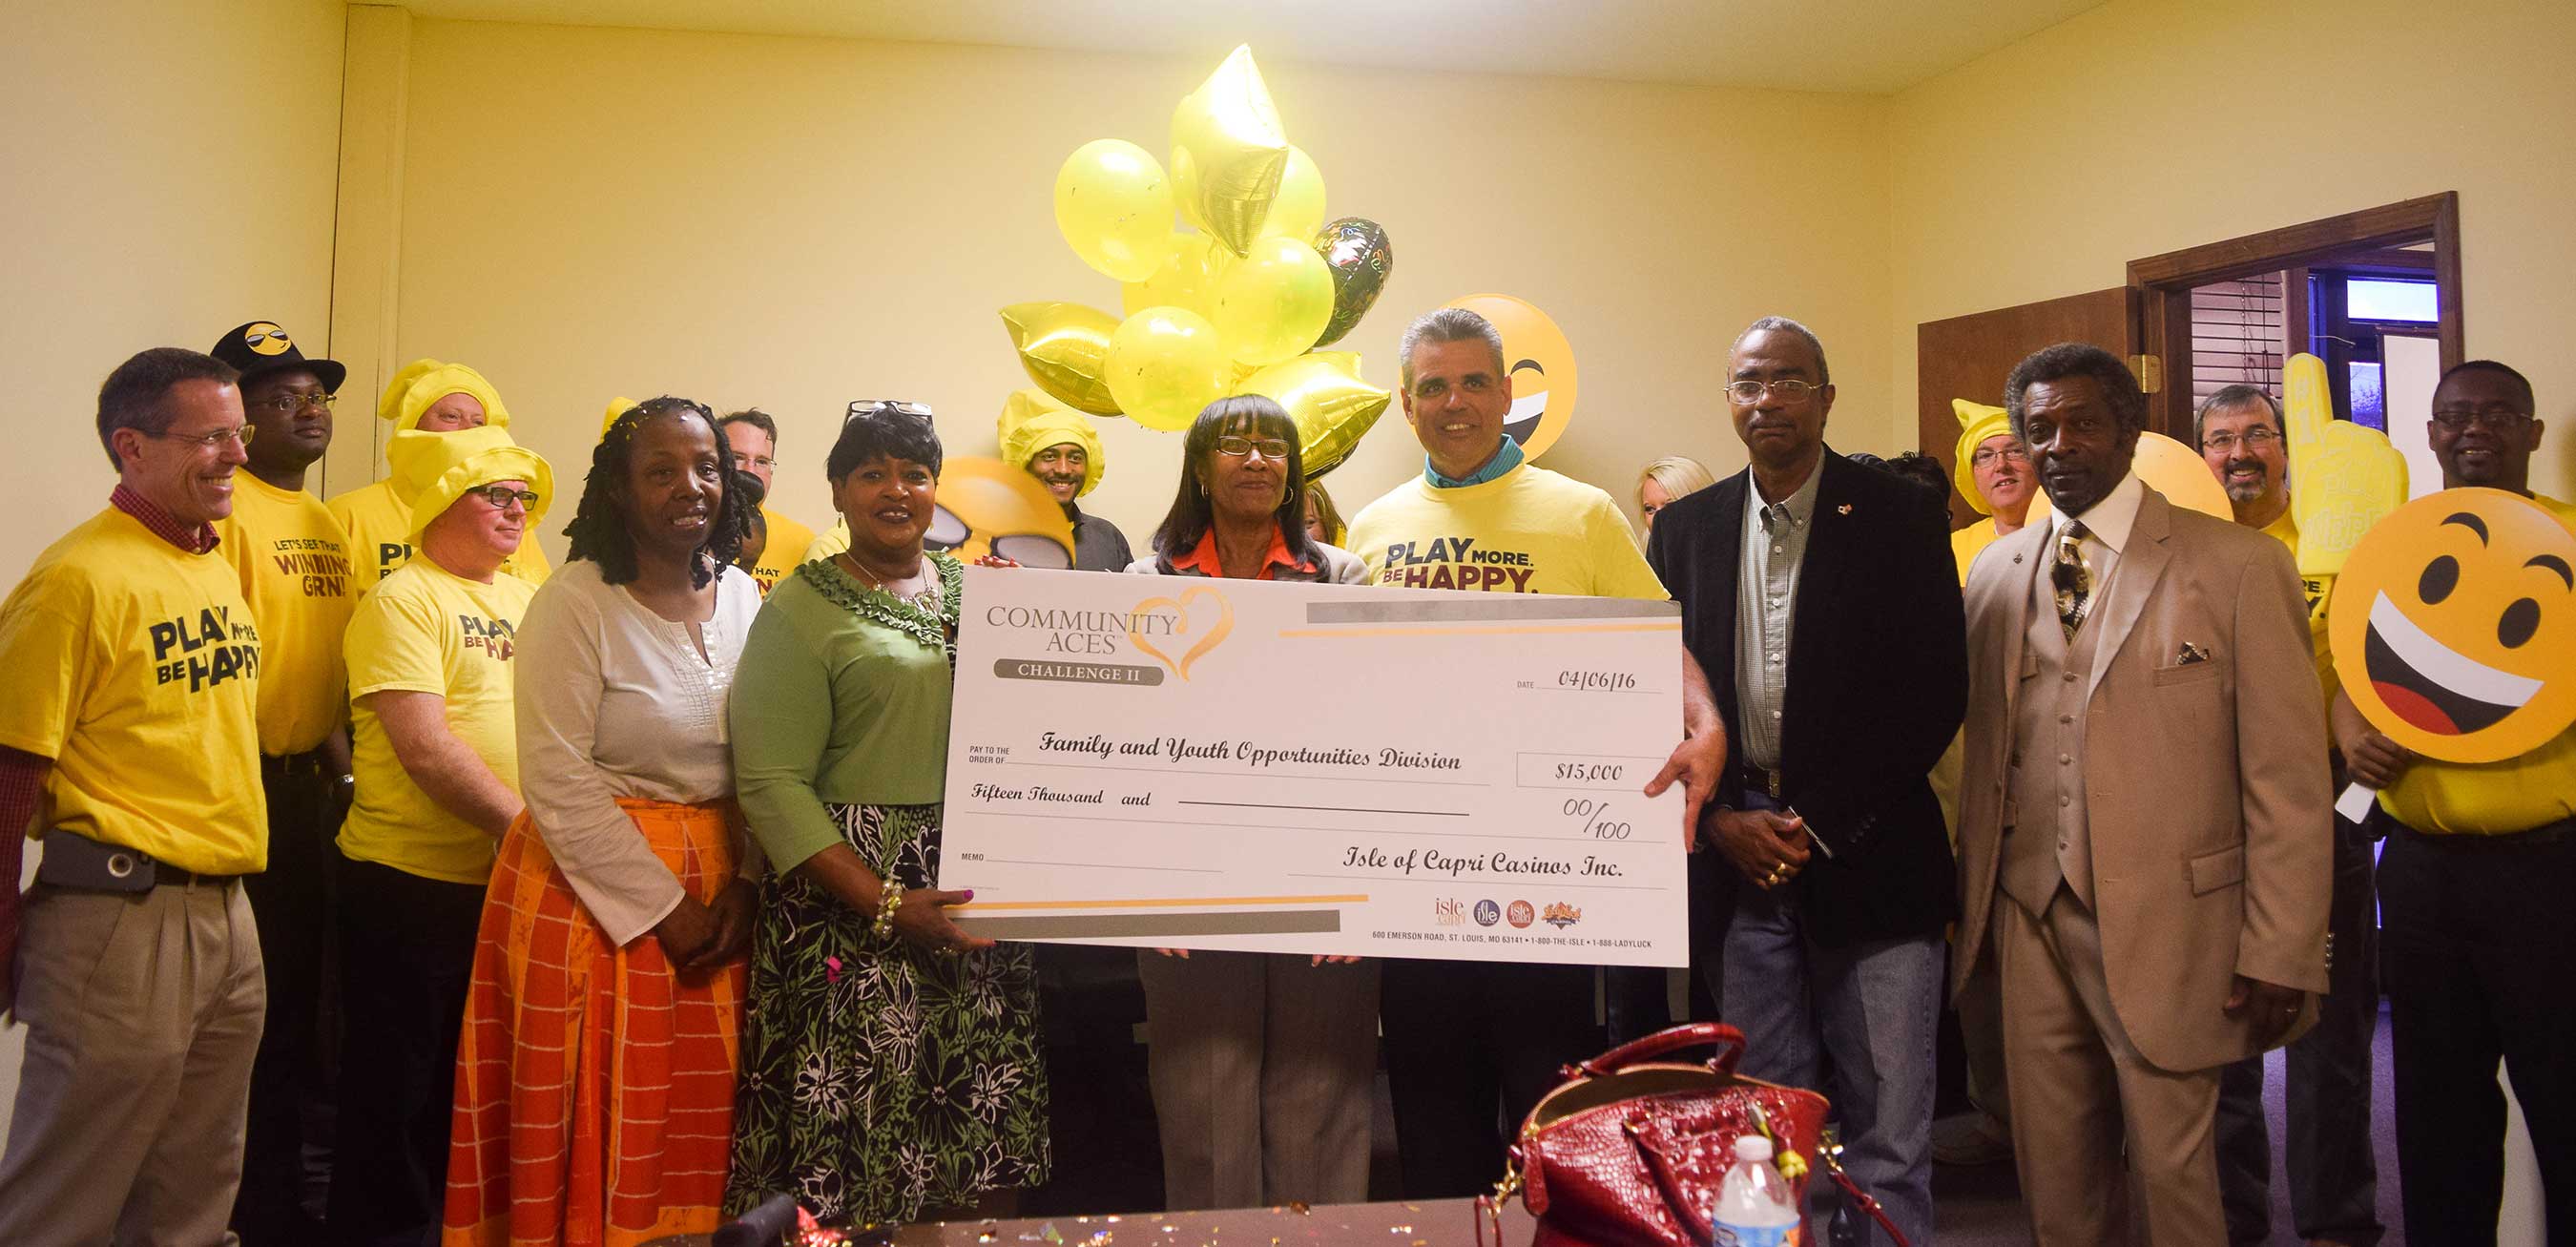 Family & Youth Opportunities Division, based in Clarksdale, Mississippi, was granted $15,000 to renovate an old school building into a community center.